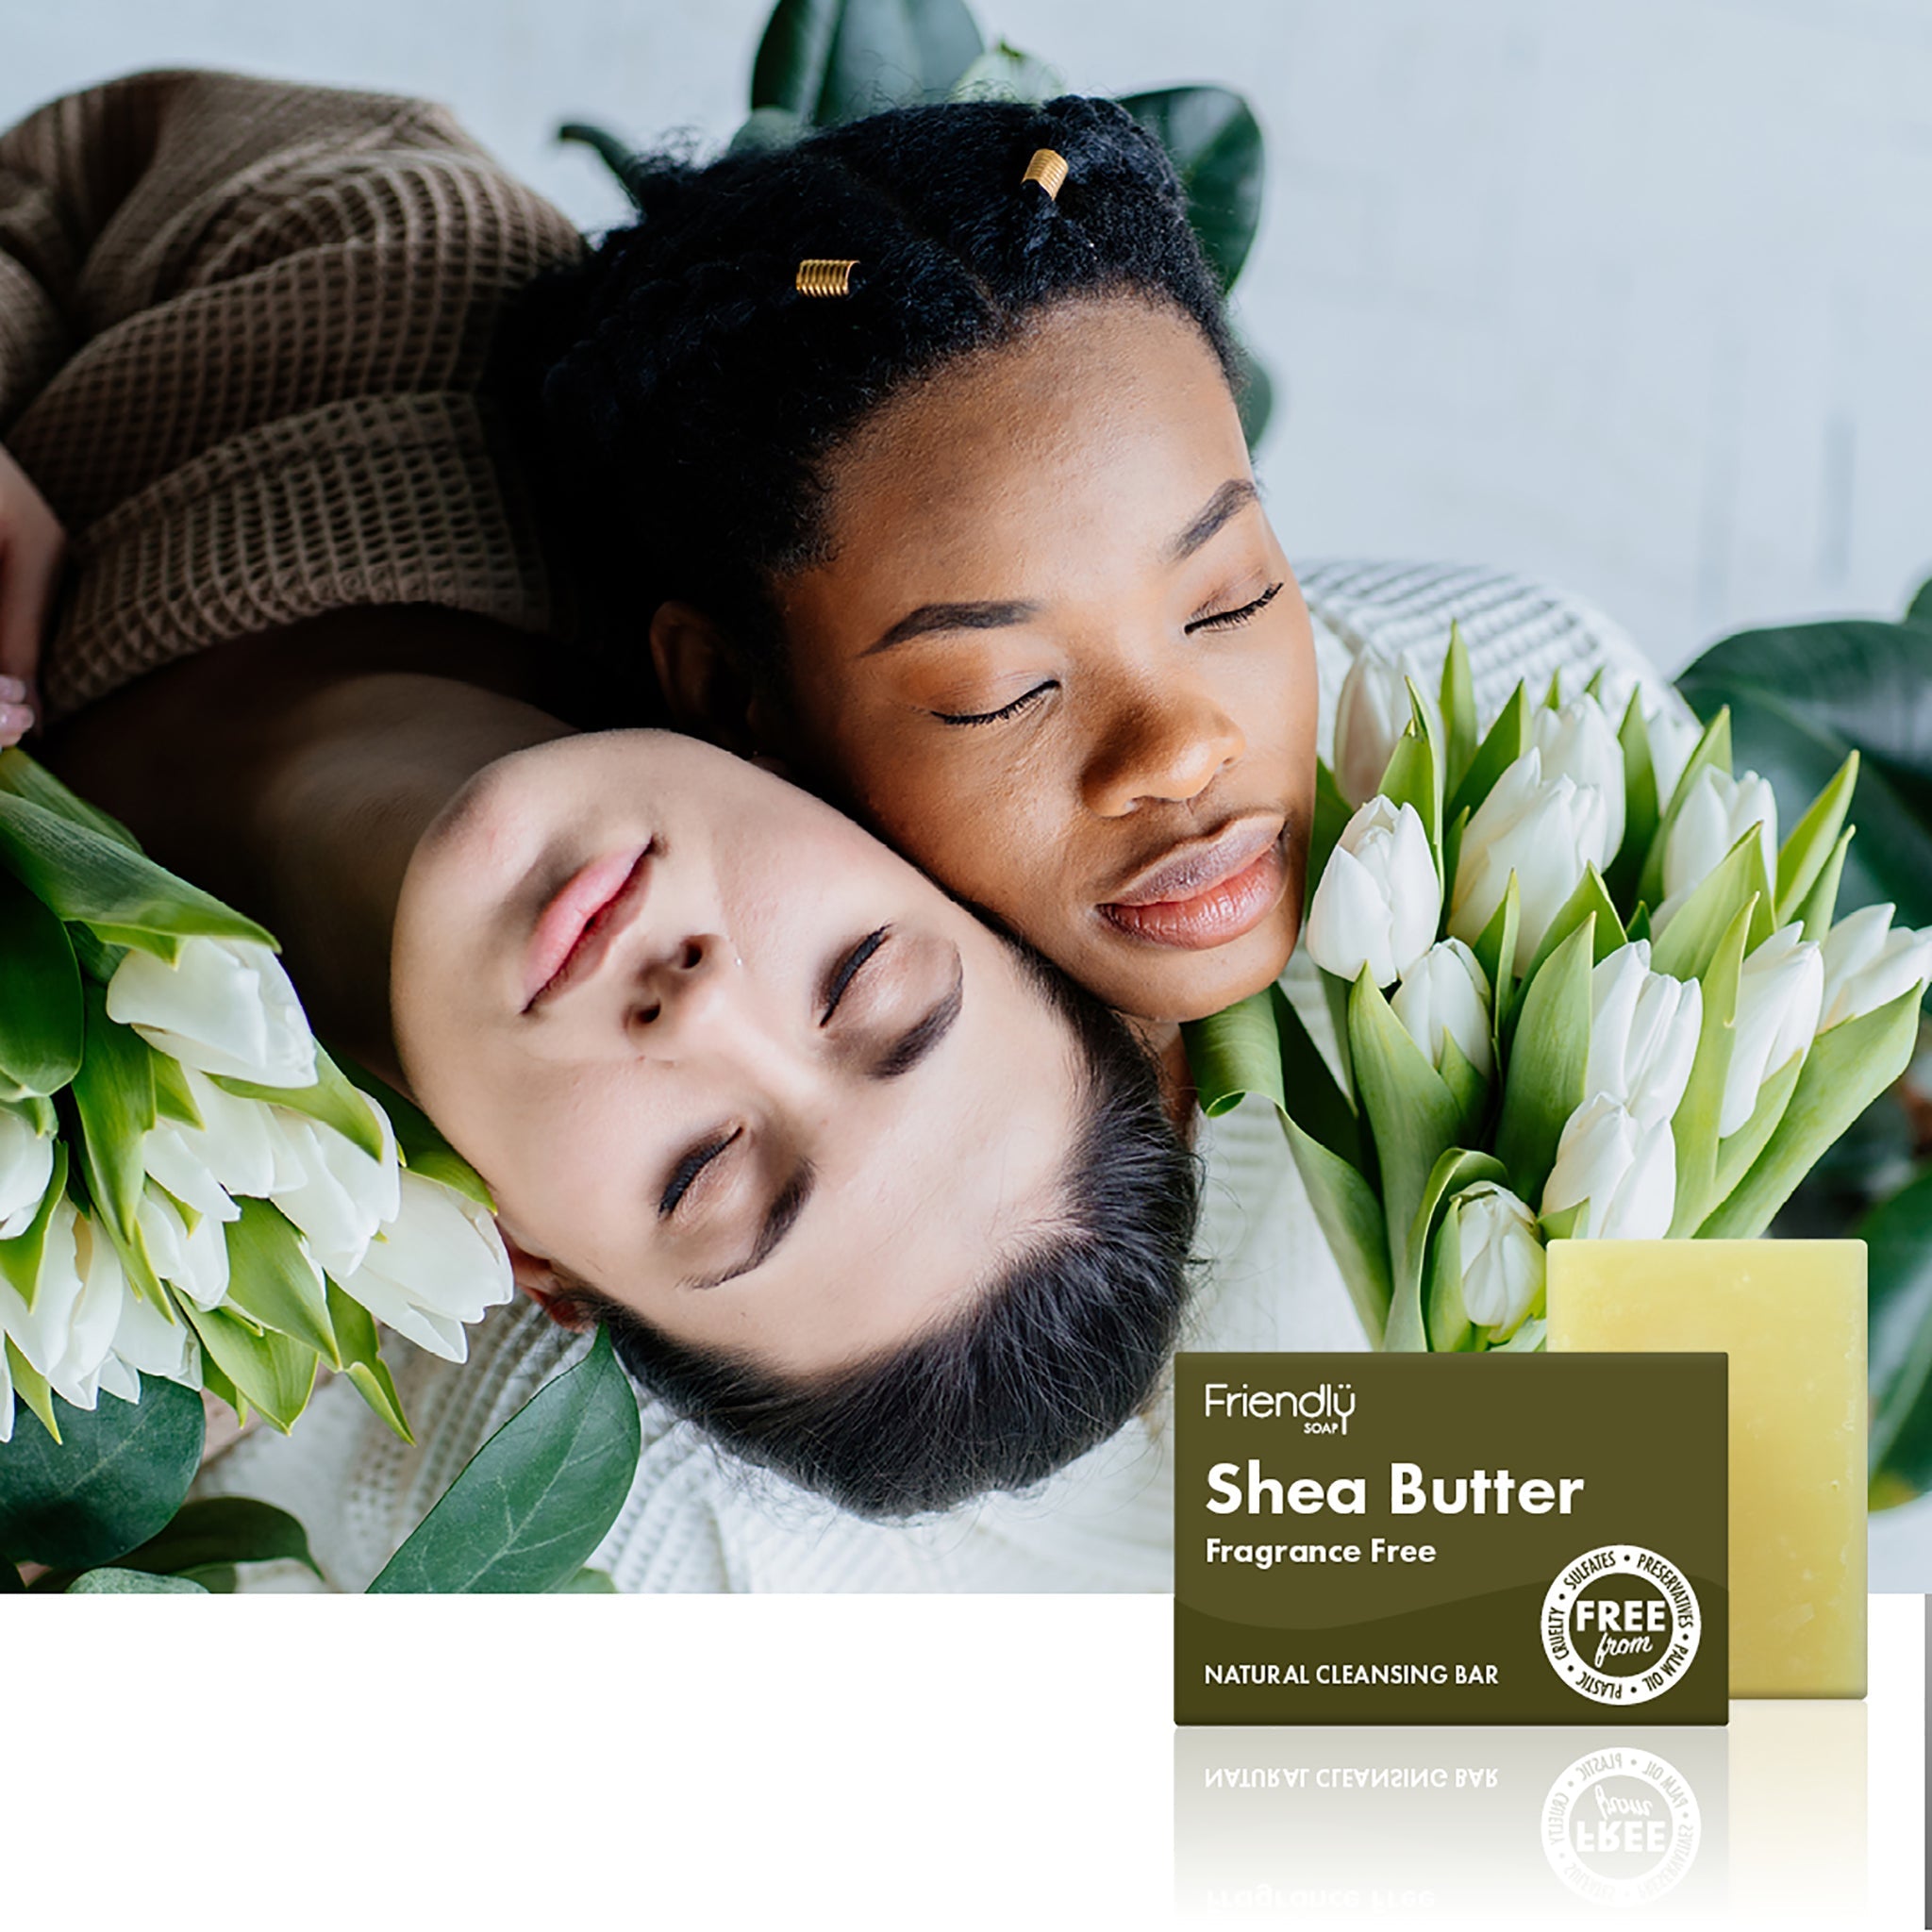 Shea Butter Fragrance Free Cleansing Bar - mypure.co.uk